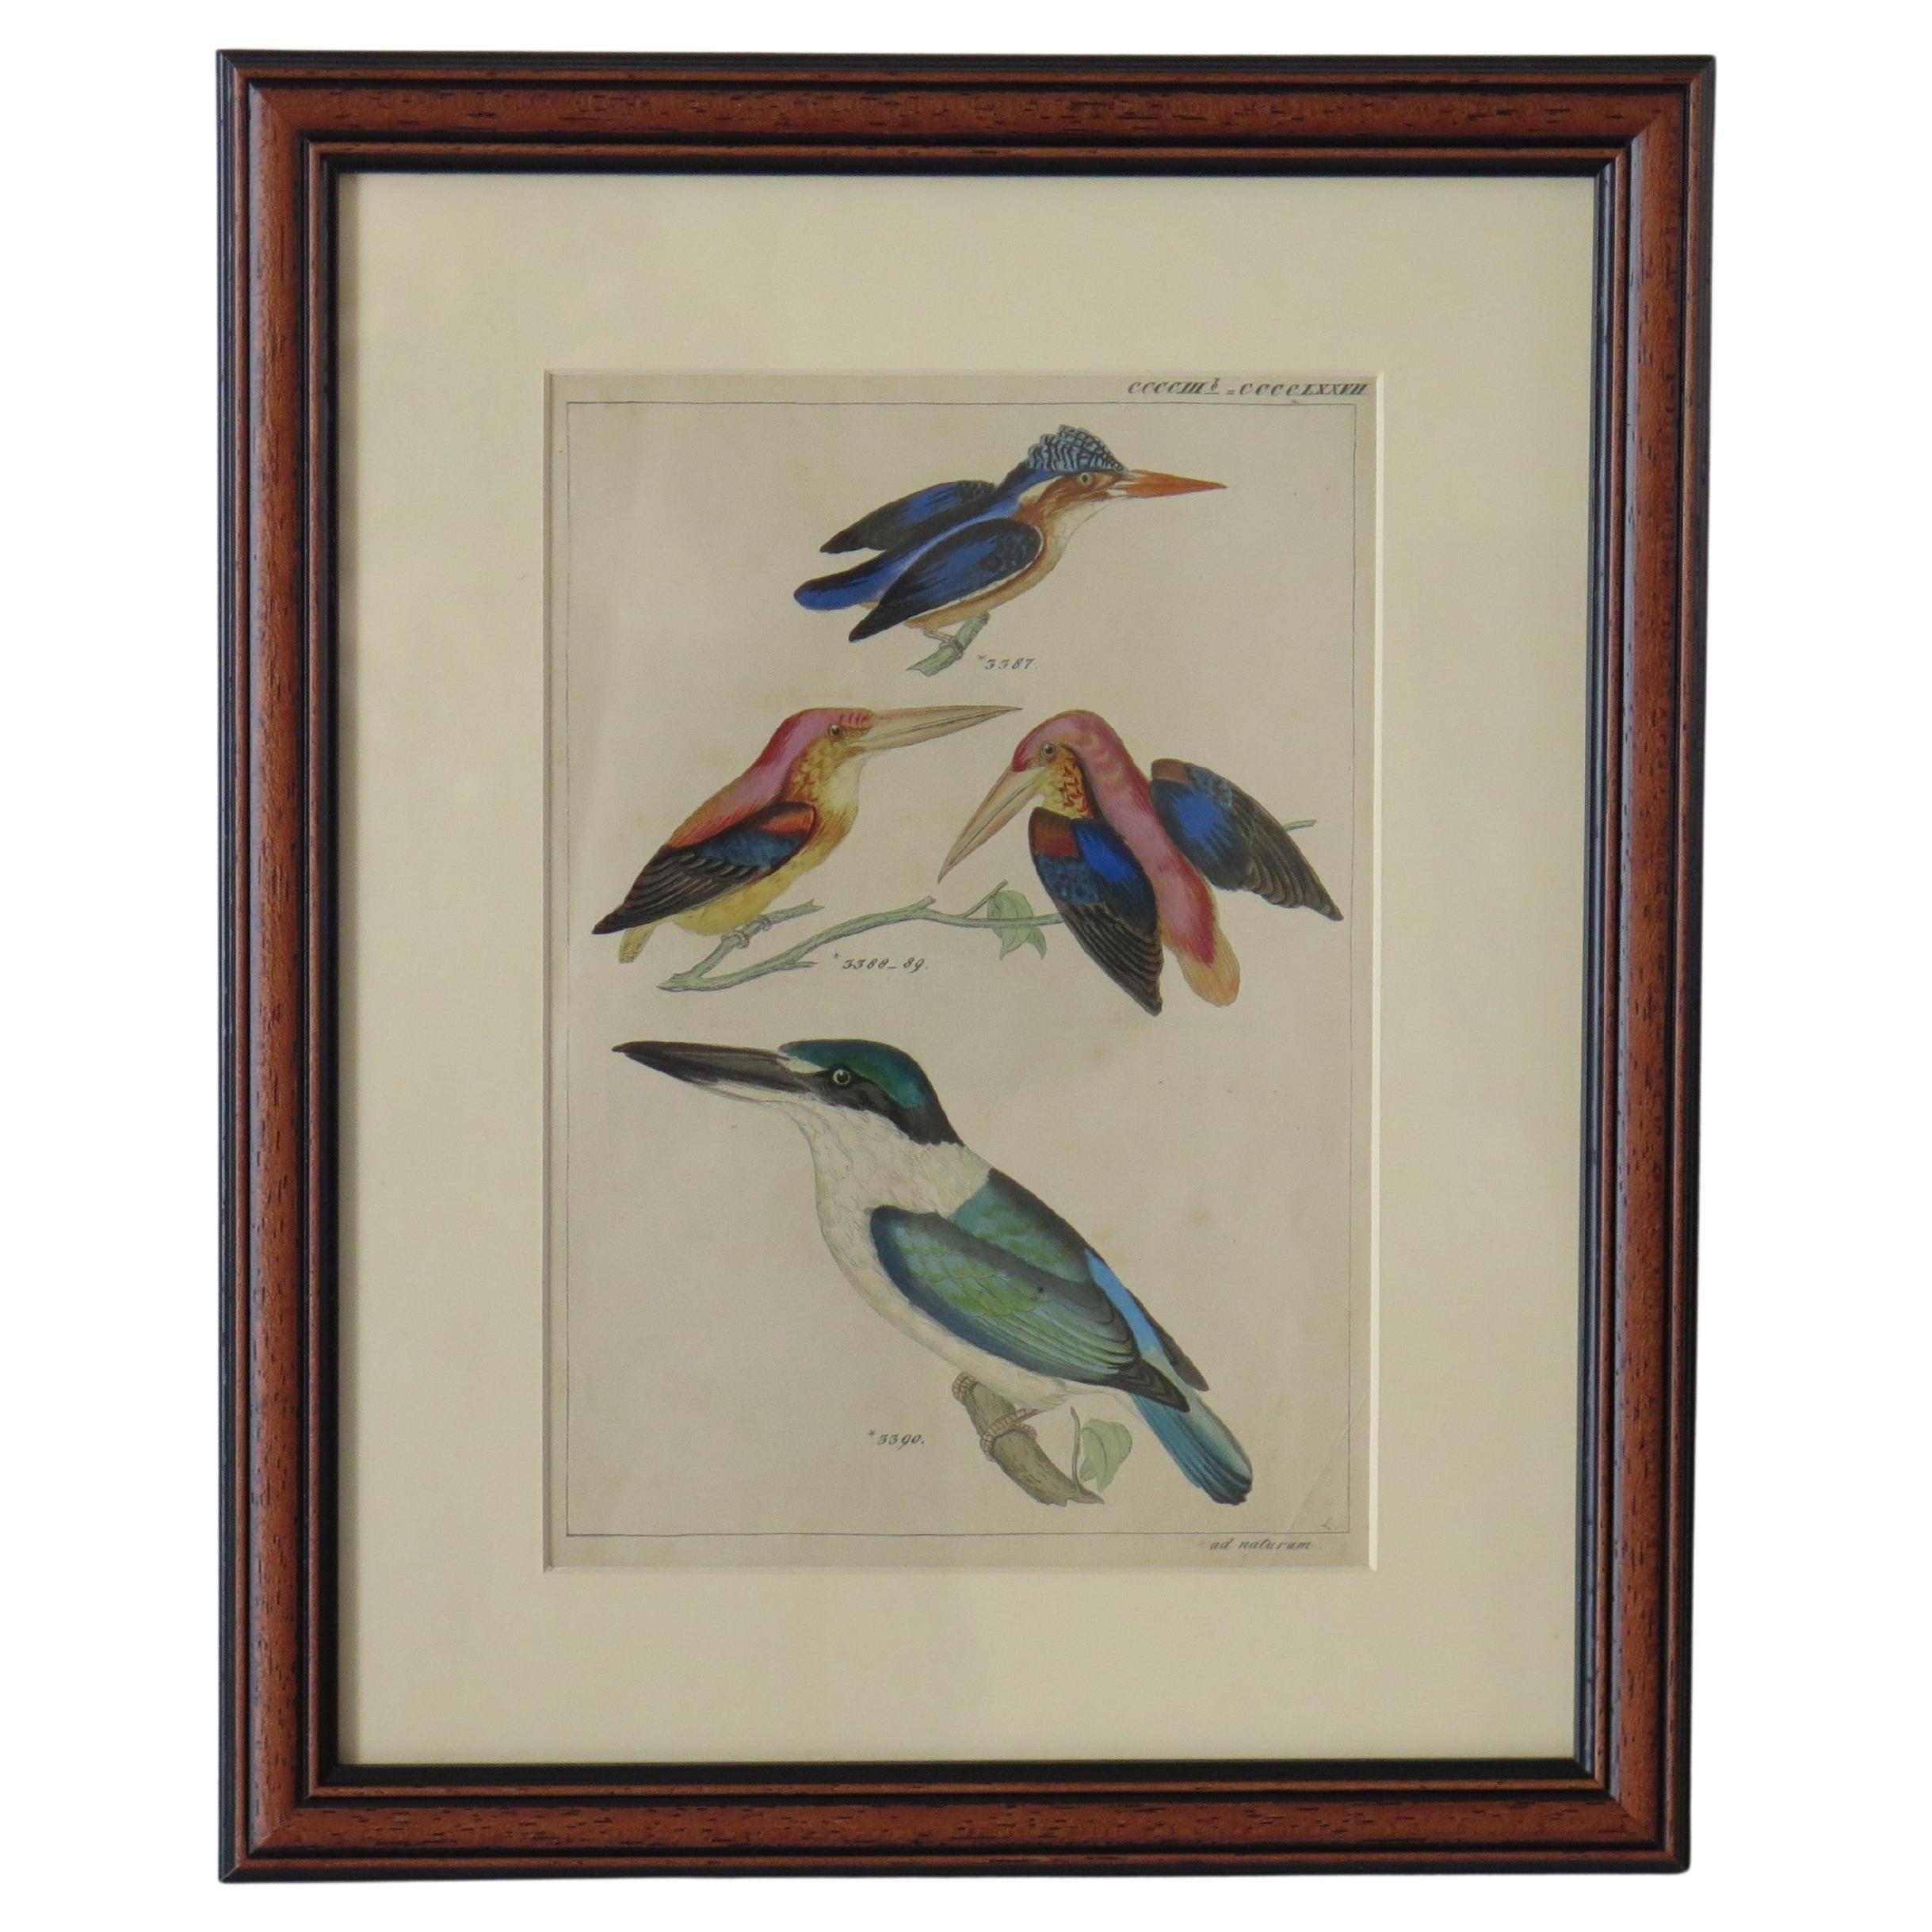 Hand Coloured Framed Engraving of Kingfishers in the Audubon style, Mid 19th C